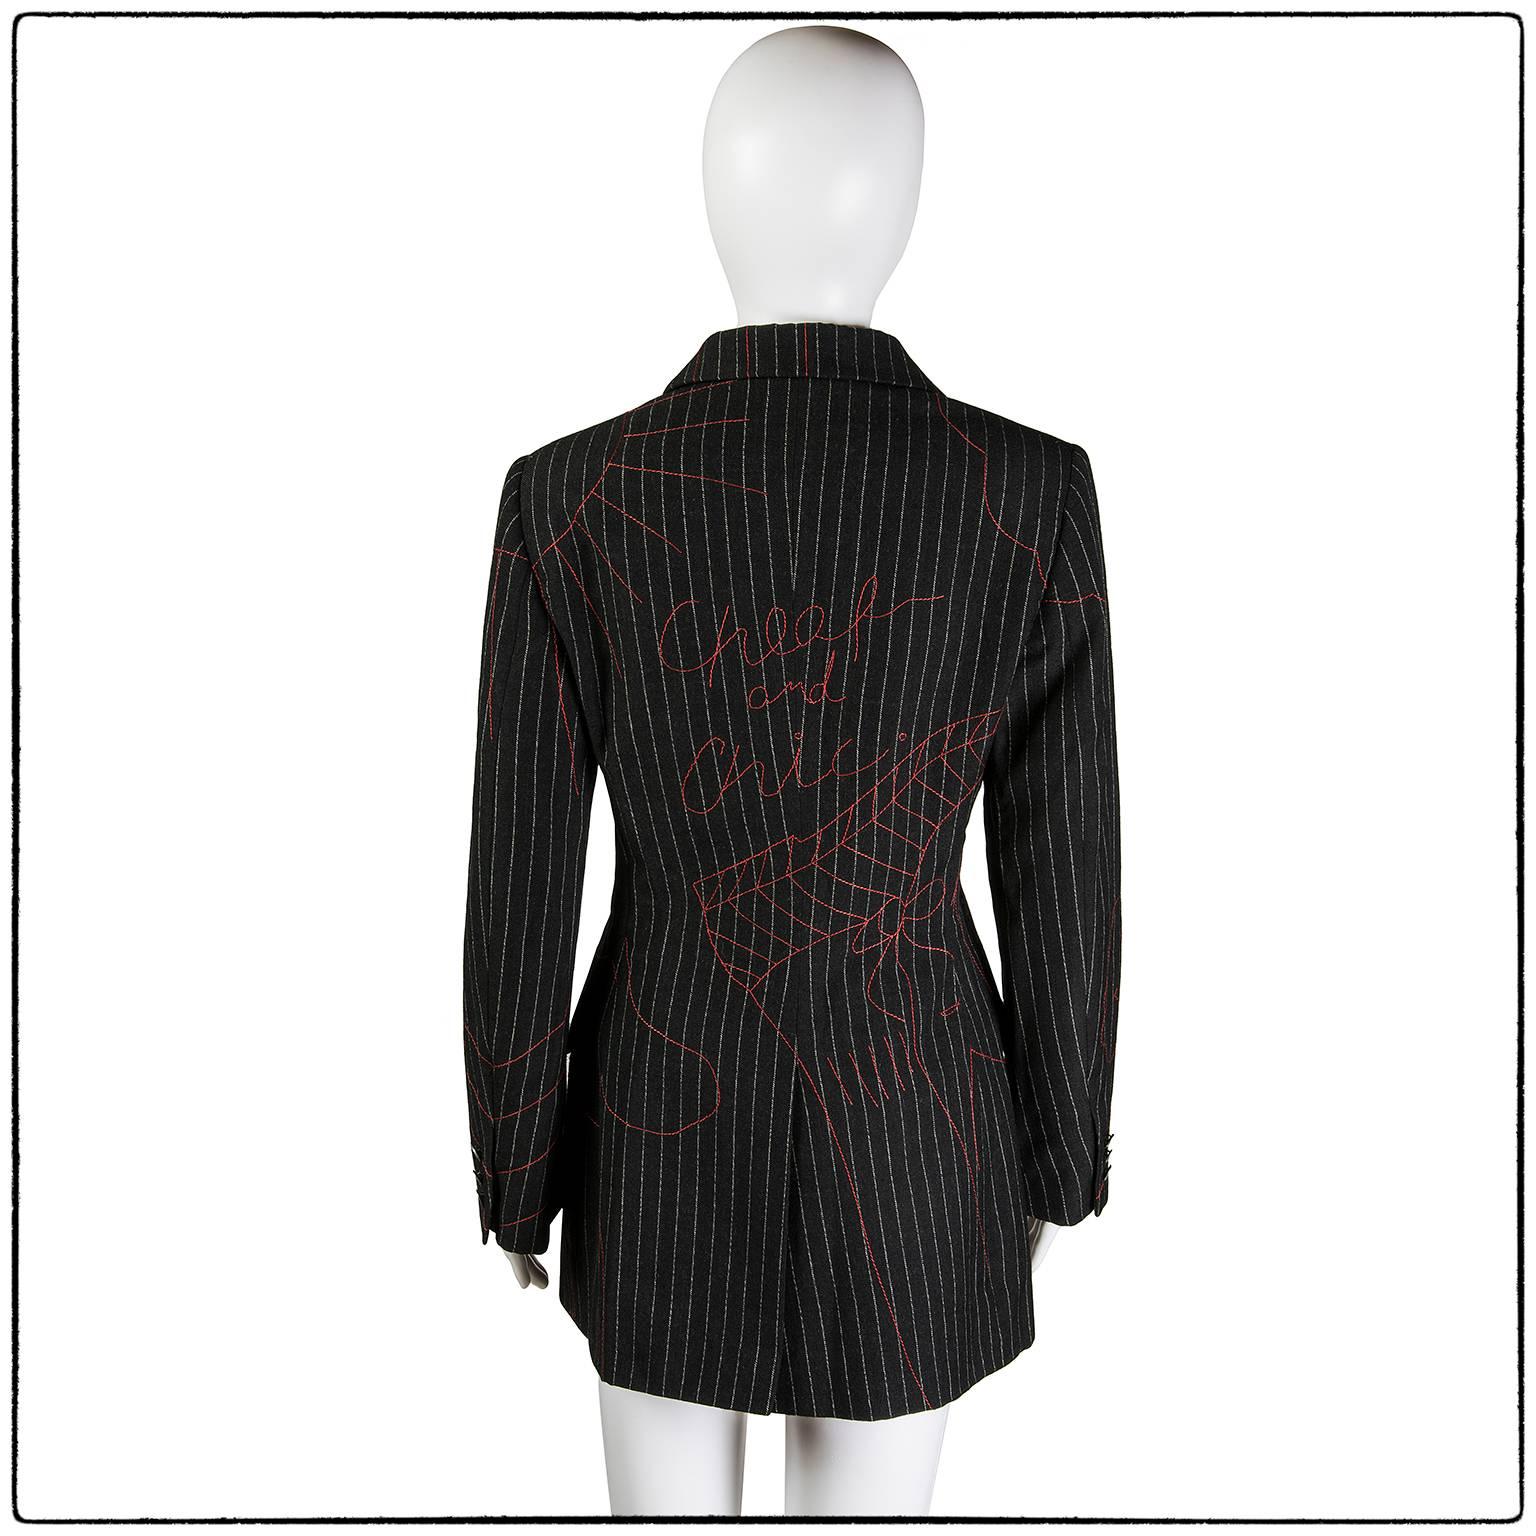 Black Moschino Cheap and Chic  blazer/ jacket with scattered face, hand, shoe, tree shadow prints on a striped fabric.

Brand: Moschino Cheap And Chic

Size : 38 eu, 42 IT,10 UK, 6US

Material: 100% wool

Condition: good condition, Some light signs